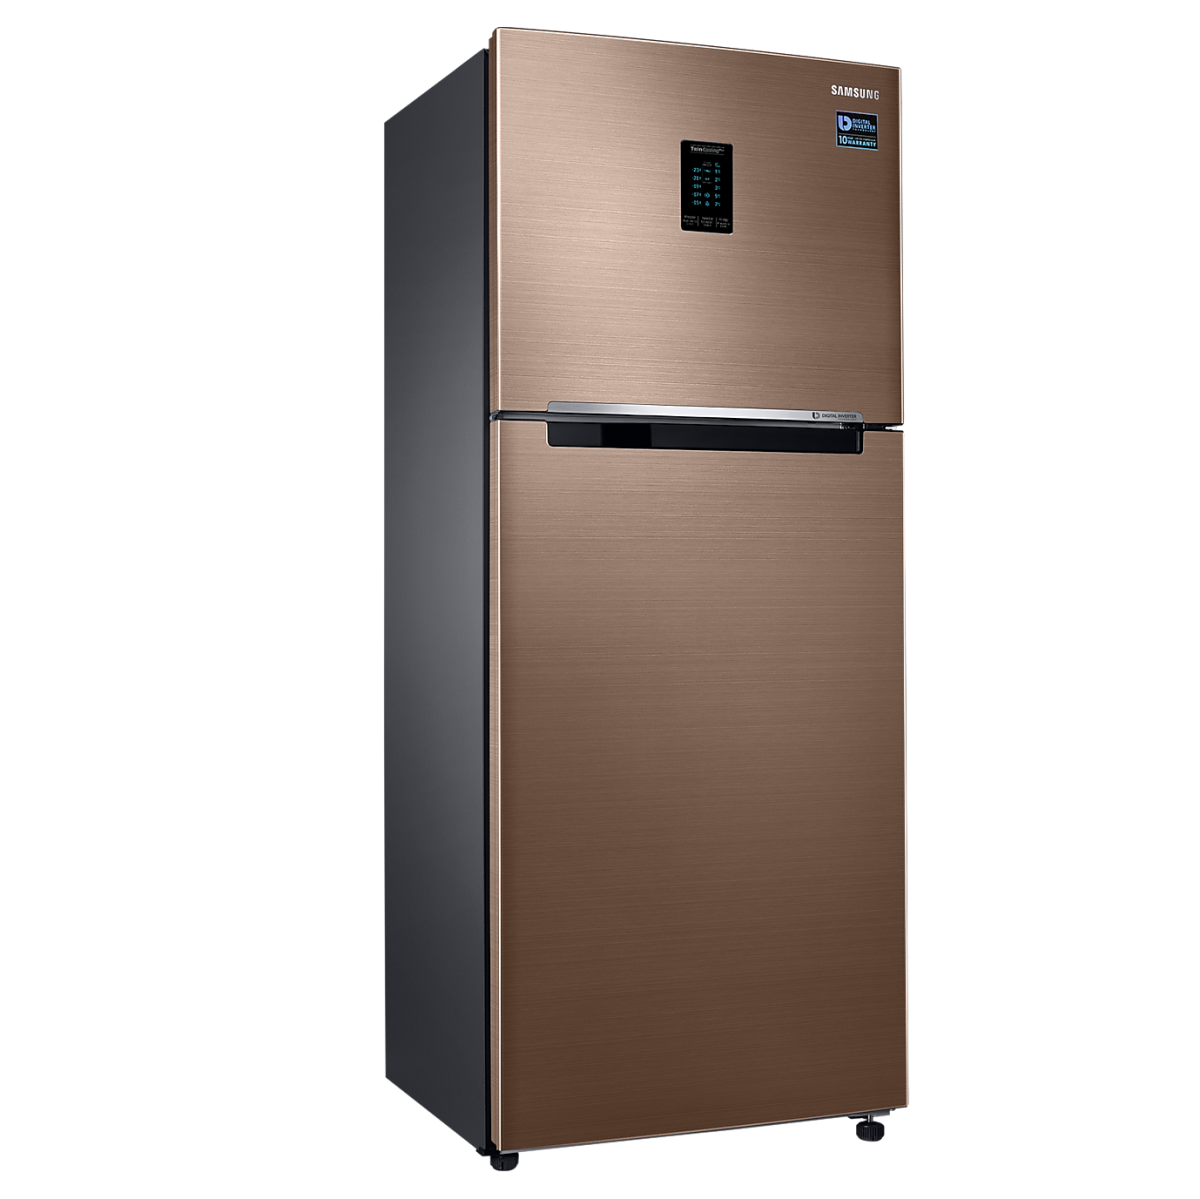 SAMSUNG 345 Liter Inverter Top Mount Refrigerator with 5 in 1 Convertible Mode RT37K5532DX/D3 Best Refrigerators of Year, Top-rated Refrigerators, Refrigerator Reviews, Refrigerator Comparison, Buying a Refrigerator Guide, Refrigerator Deals and Offers Best Refrigerators of Year, Top-rated Refrigerators, Refrigerator Reviews, Refrigerator Comparison, Buying a Refrigerator Guide, Refrigerator Deals and Offers, Best refrigerators in Chittagong, Best selling refrigerators in Chittagong, Best Electronics Store in Chittagong, Meem Electronics, MeemElectronics, Best Deal of Refrigerator, SAMSUNG Refrigerator price in Chittagong, SAMSUNG Refrigerator price in Bangladersh, 345 Liter Refrigerator, SAMSUNG Refrigerator, 01919382008, 01919382009, 019193820010